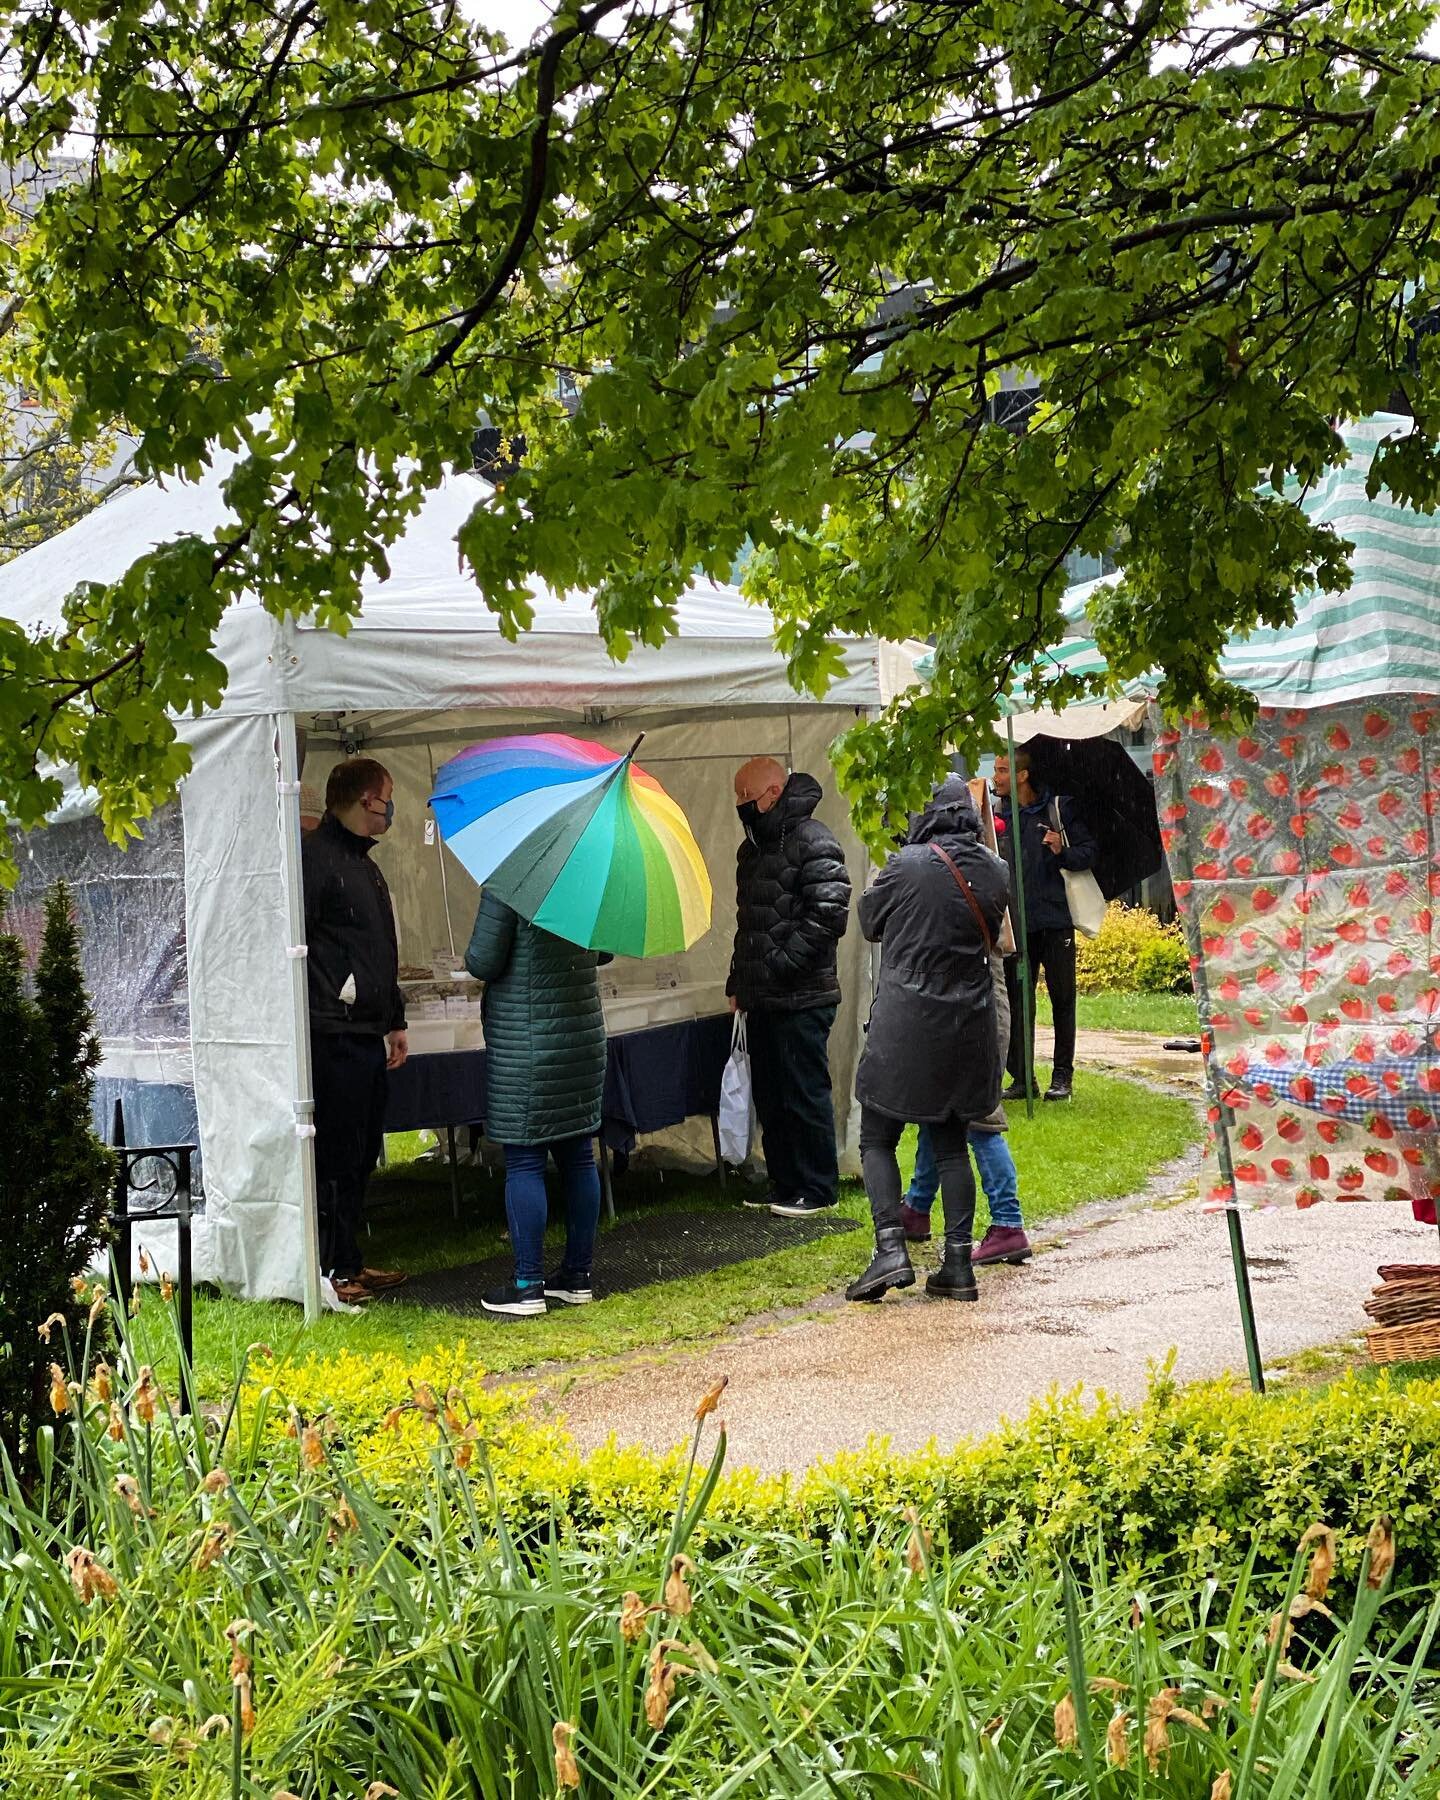 It might be bucketing down now, but tomorrow is looking bright! ☀️🌈

Full stall list coming later, we&rsquo;re writing a shopping list for soups, stews and all things autumnal this weekend. What will you be buying? 🍂🍁